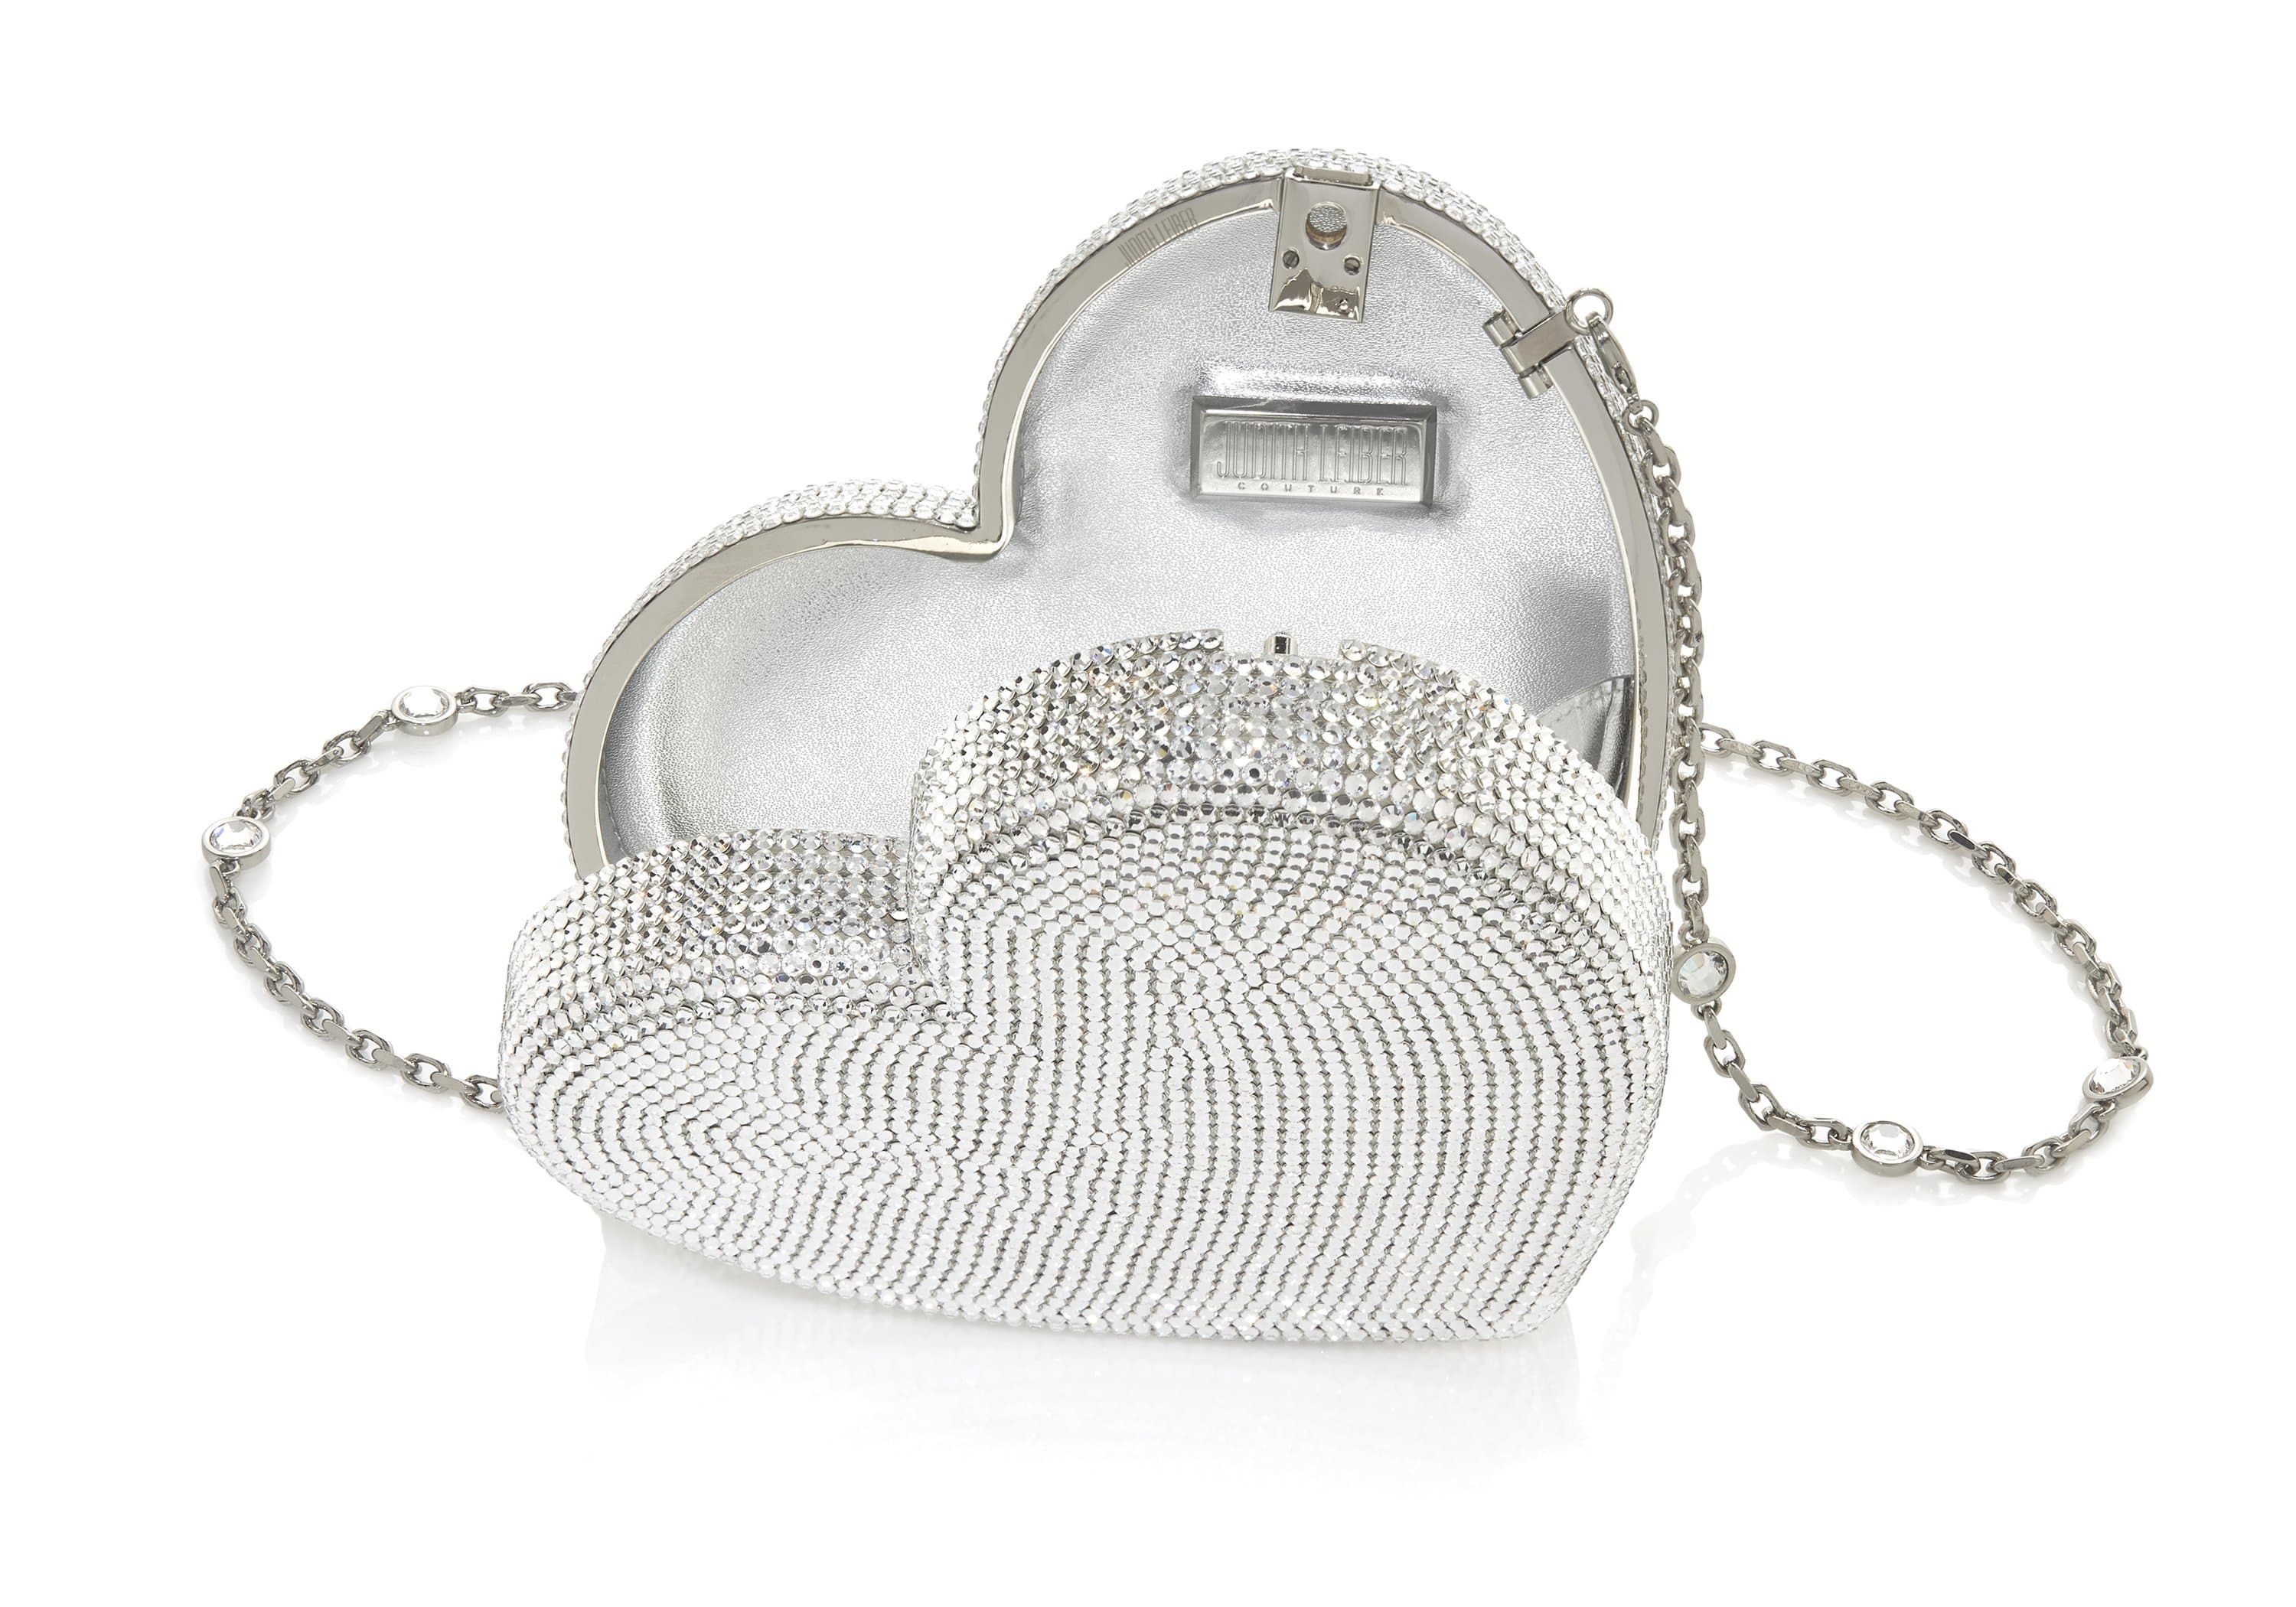 Judith Leiber Couture Heart Crystal-embellished Clutch